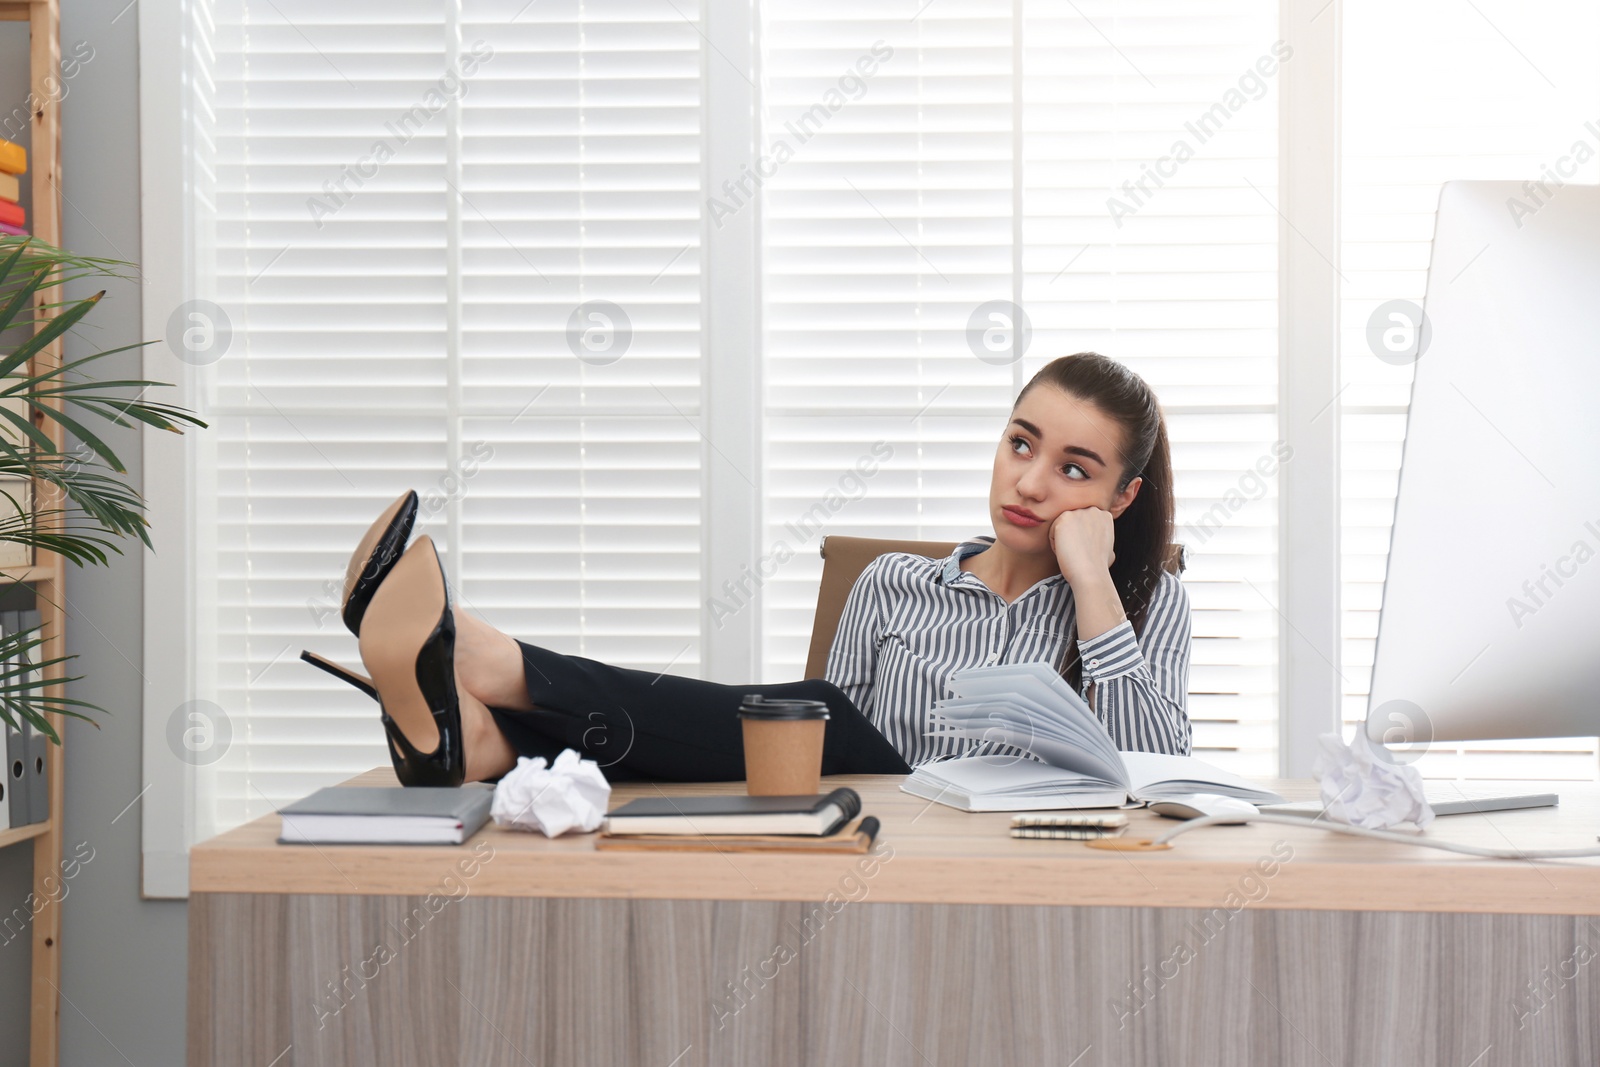 Photo of Lazy employee wasting time at table in office